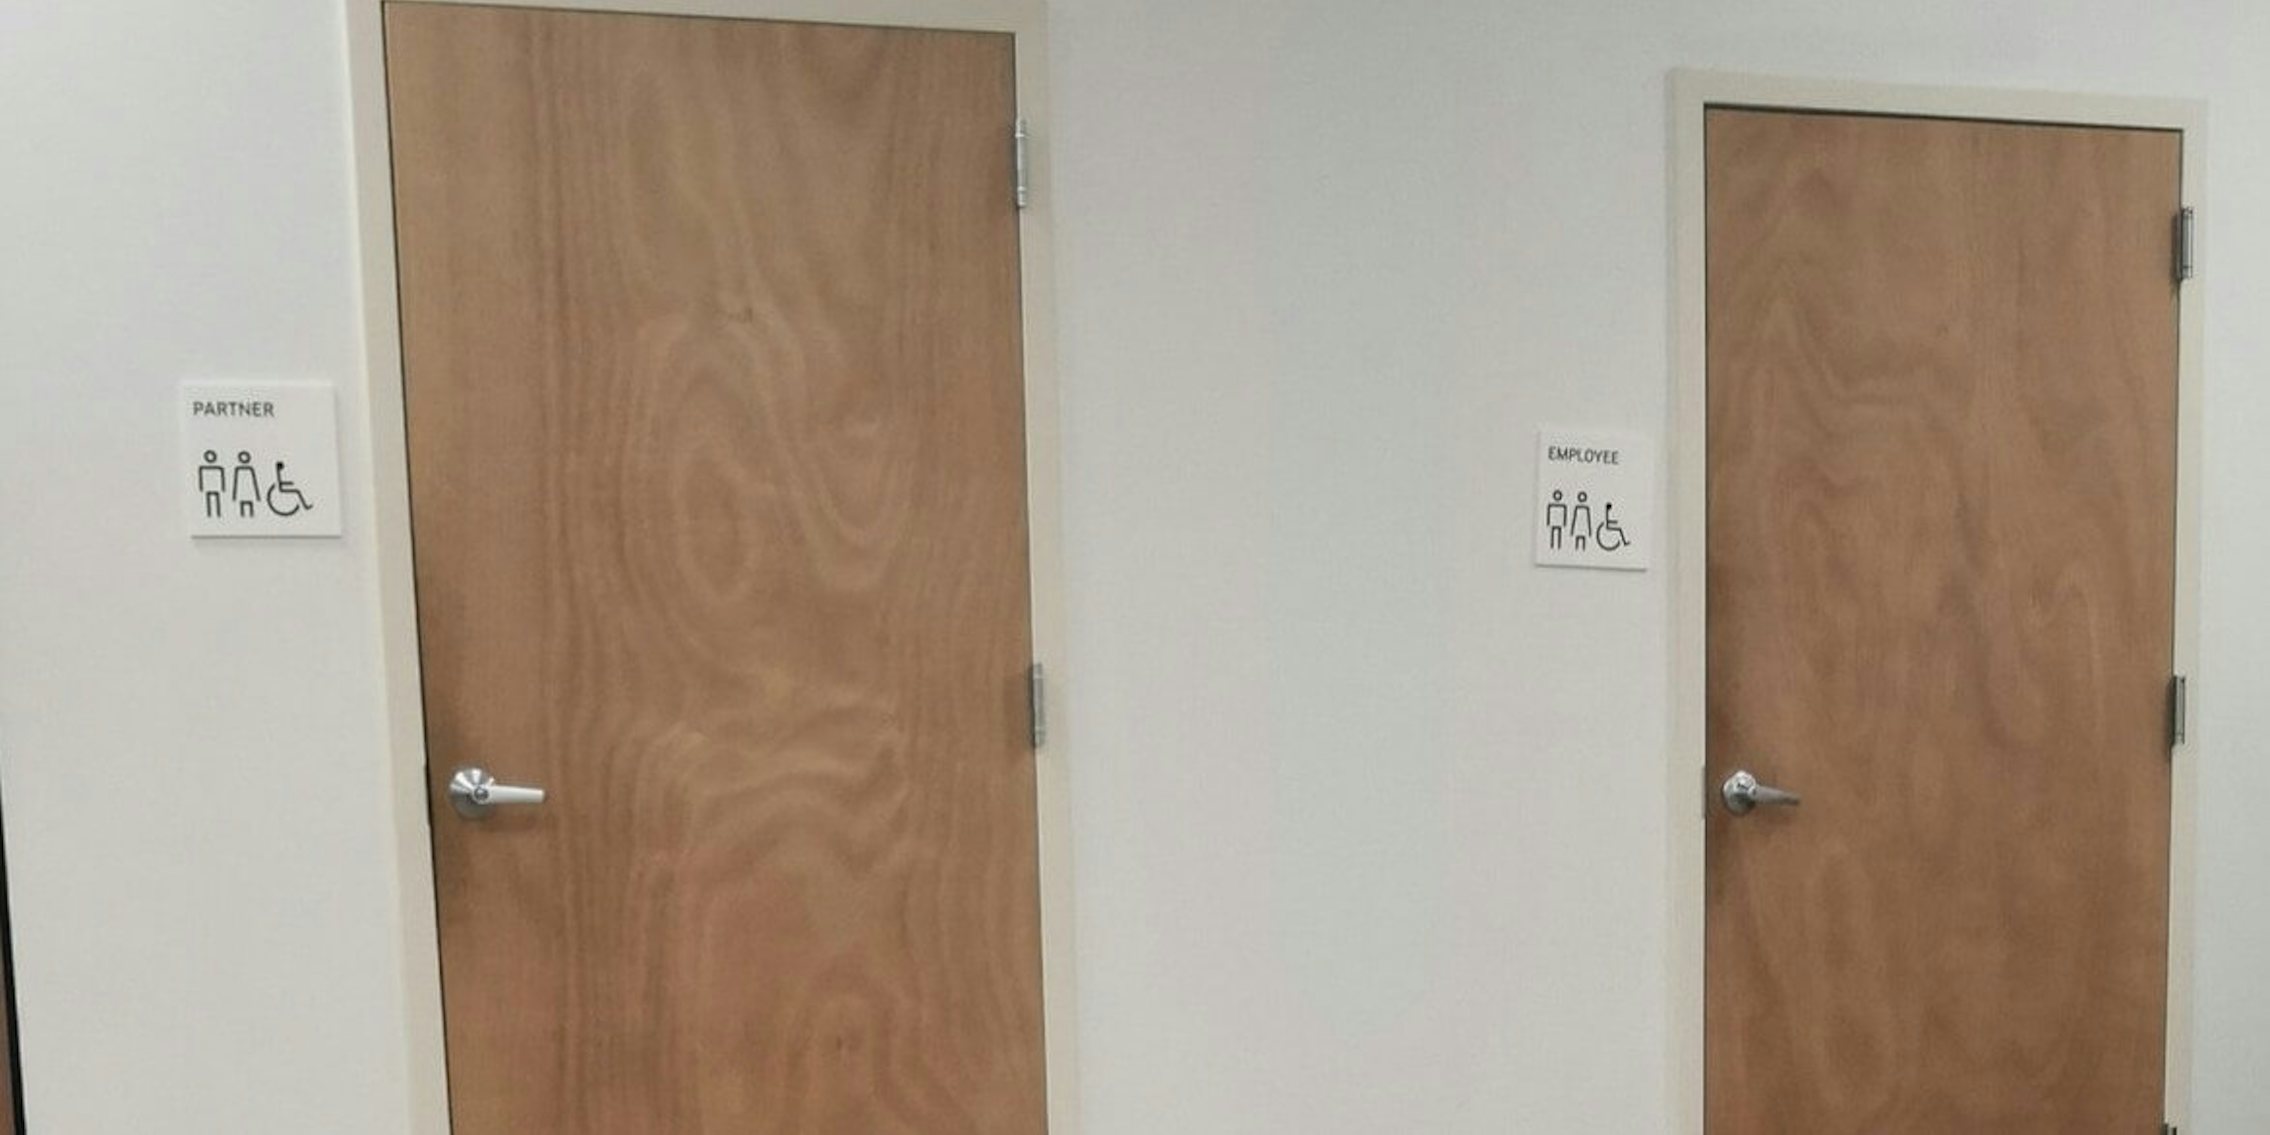 One bathroom sign shows 'Partner' and another shows 'Employee'